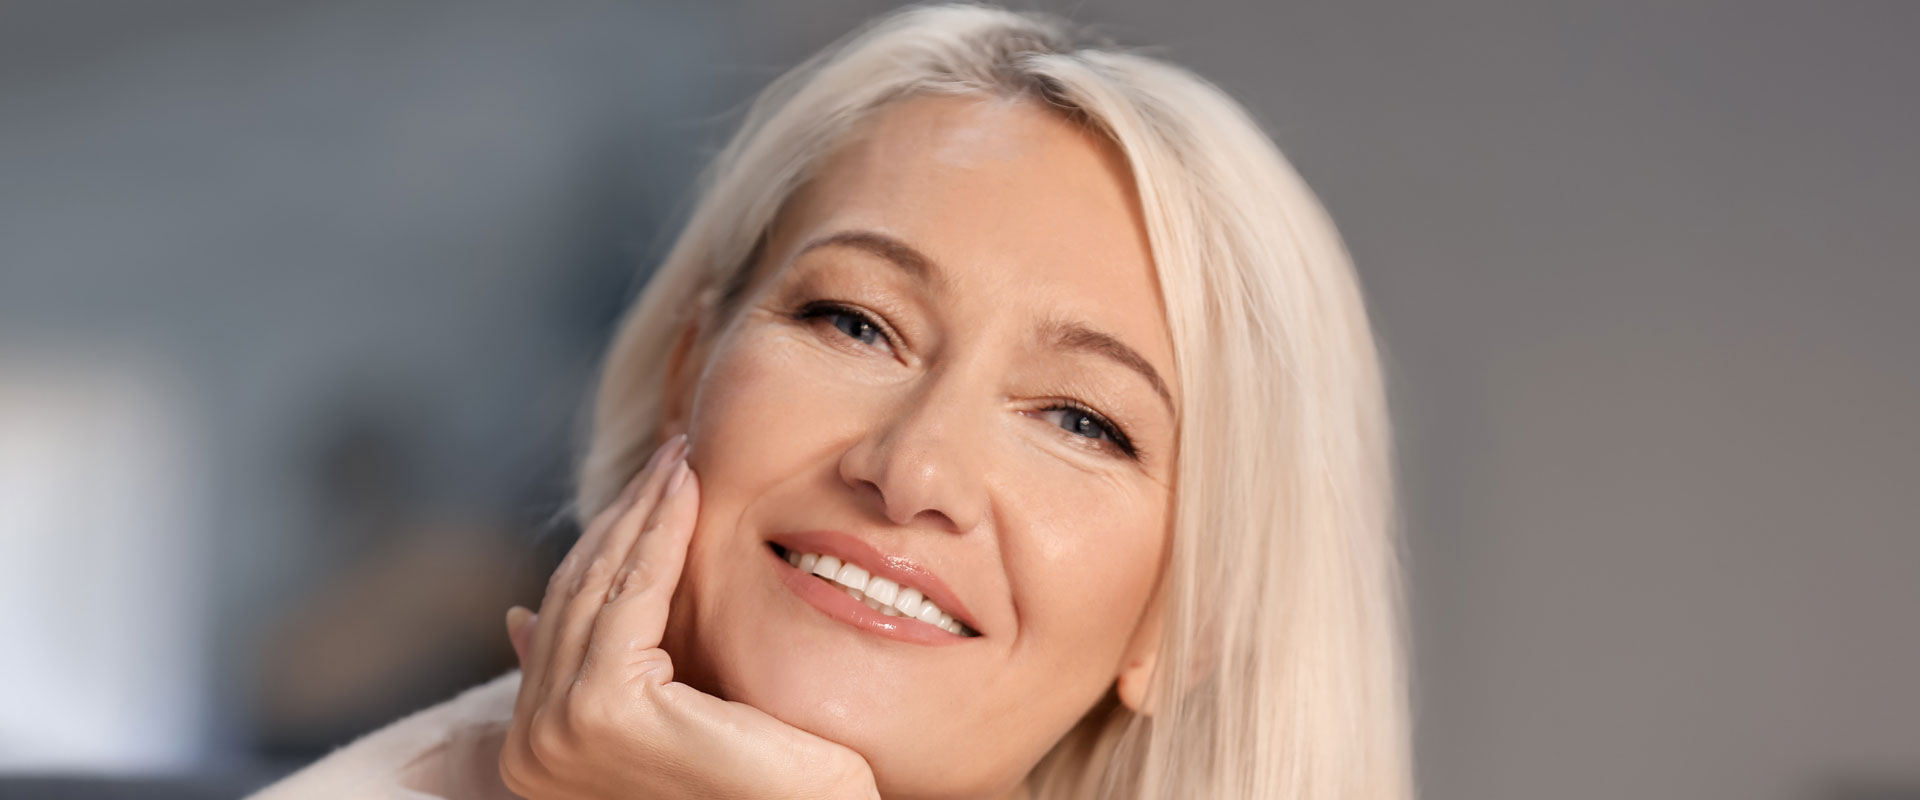 Smiling middle aged woman